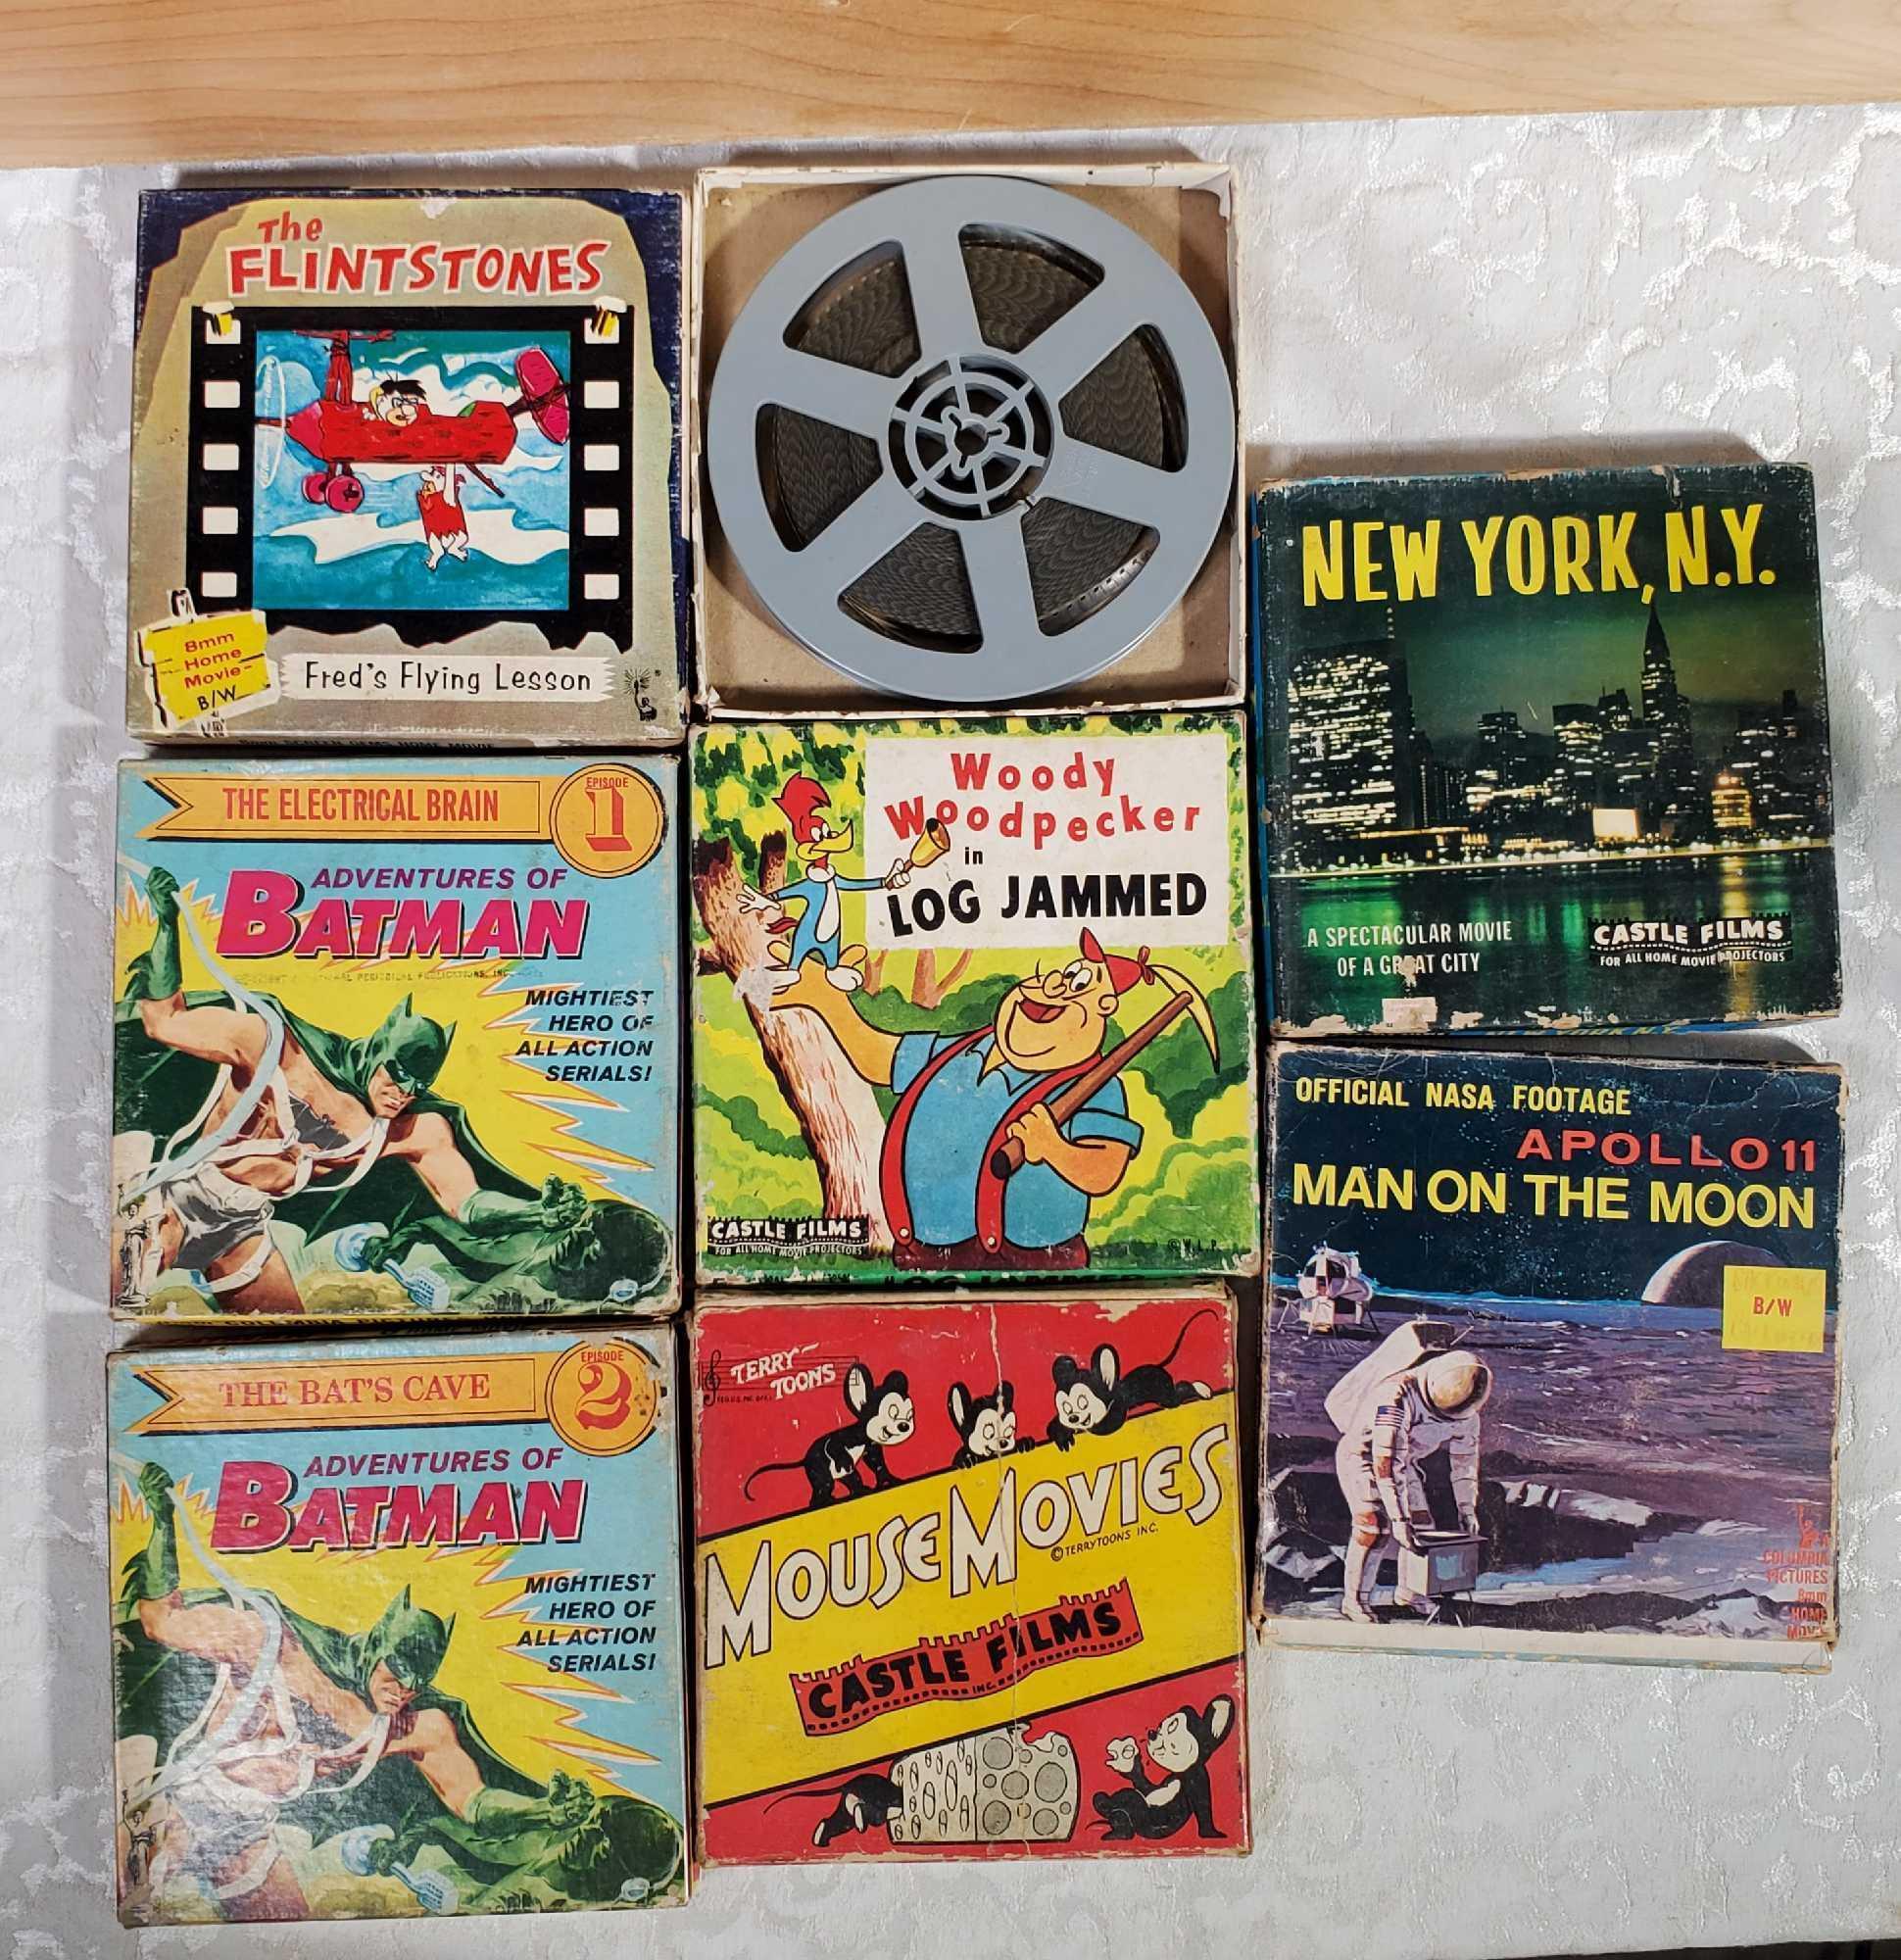 Steiff Travel Bear, Garbage Pail Kids, Vintage Comic Movie Reels, Doll House Furniture, and Other